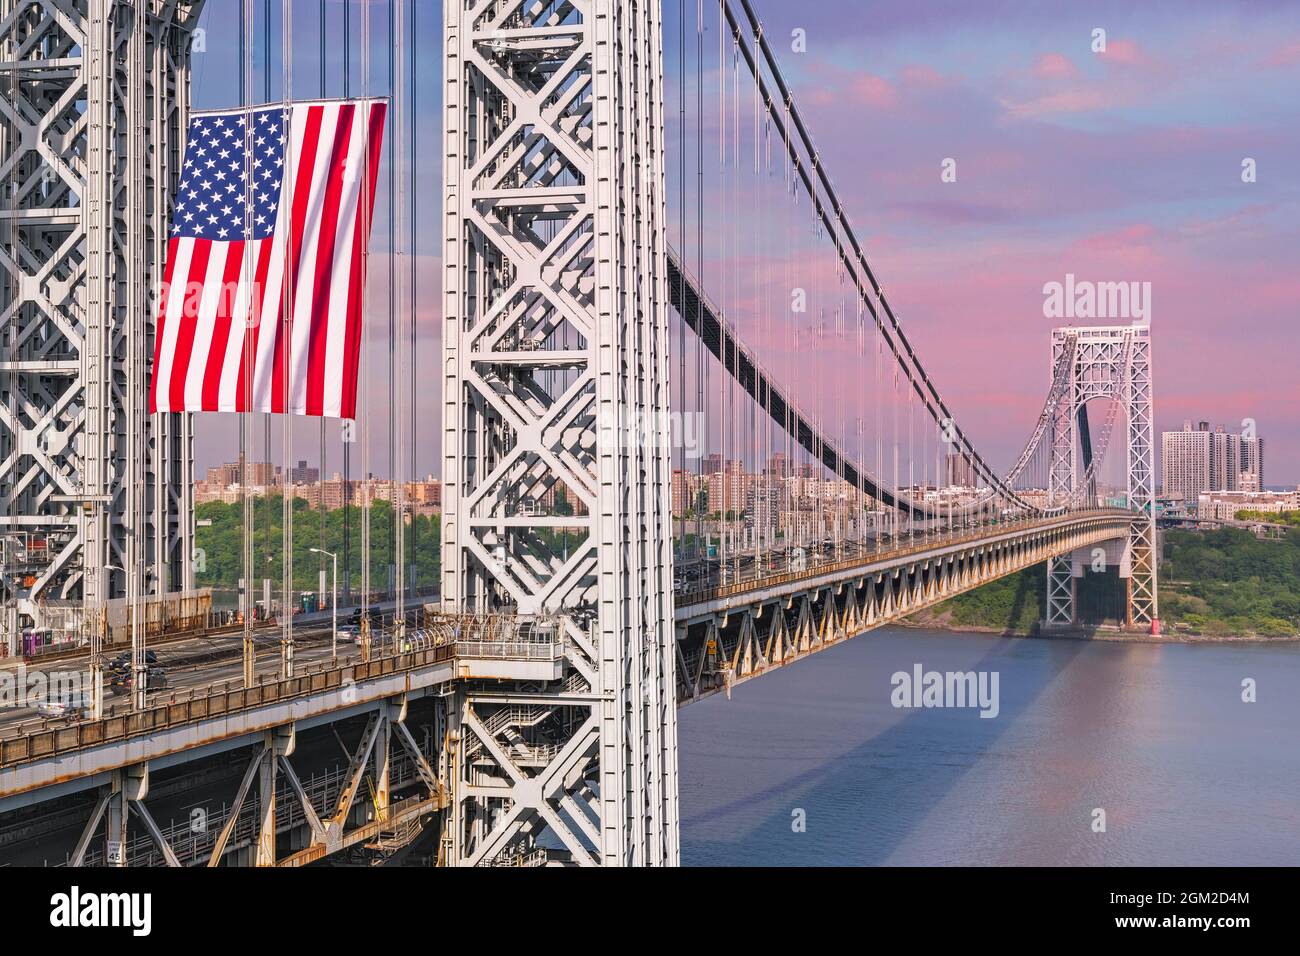 George Washington Bridge GWB USA - View of the New Jersey NJ side stanchion with the worlds largest free flying American flag.   The GW is also referr Stock Photo